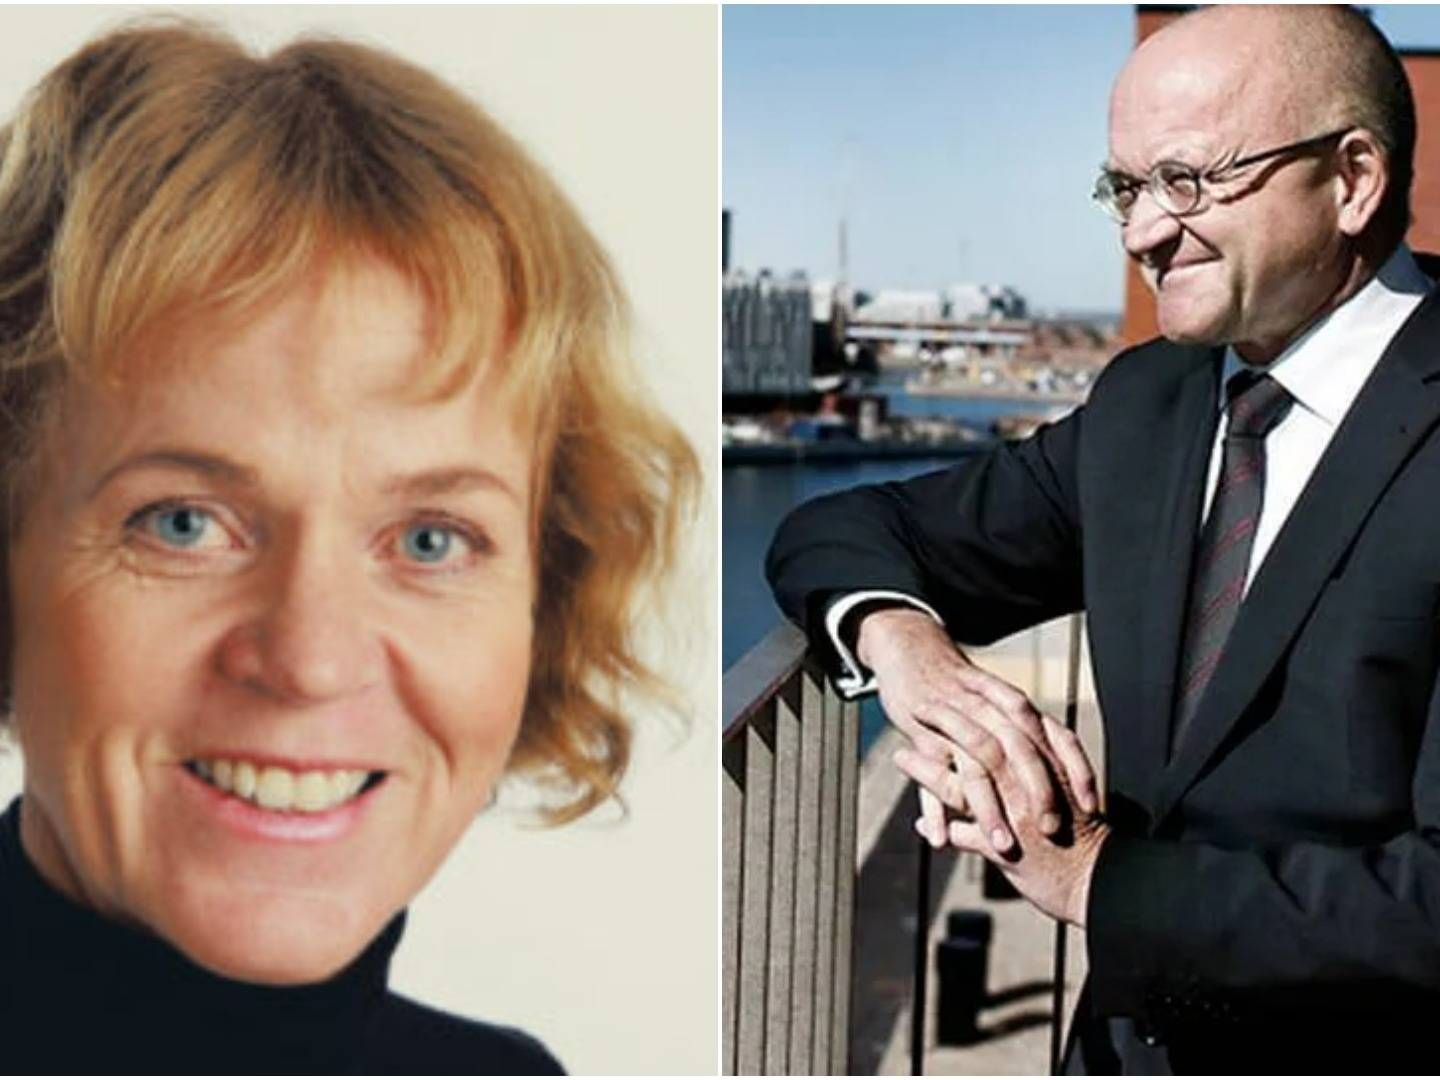 Helena Olin, Head of Real Assets at AP2 and Torben Möger Pedersen, CEO at PensionDanmark. Both pension funds have invested in several of CIP's funds. | Photo: PR / AP 2 & PensionDanmark